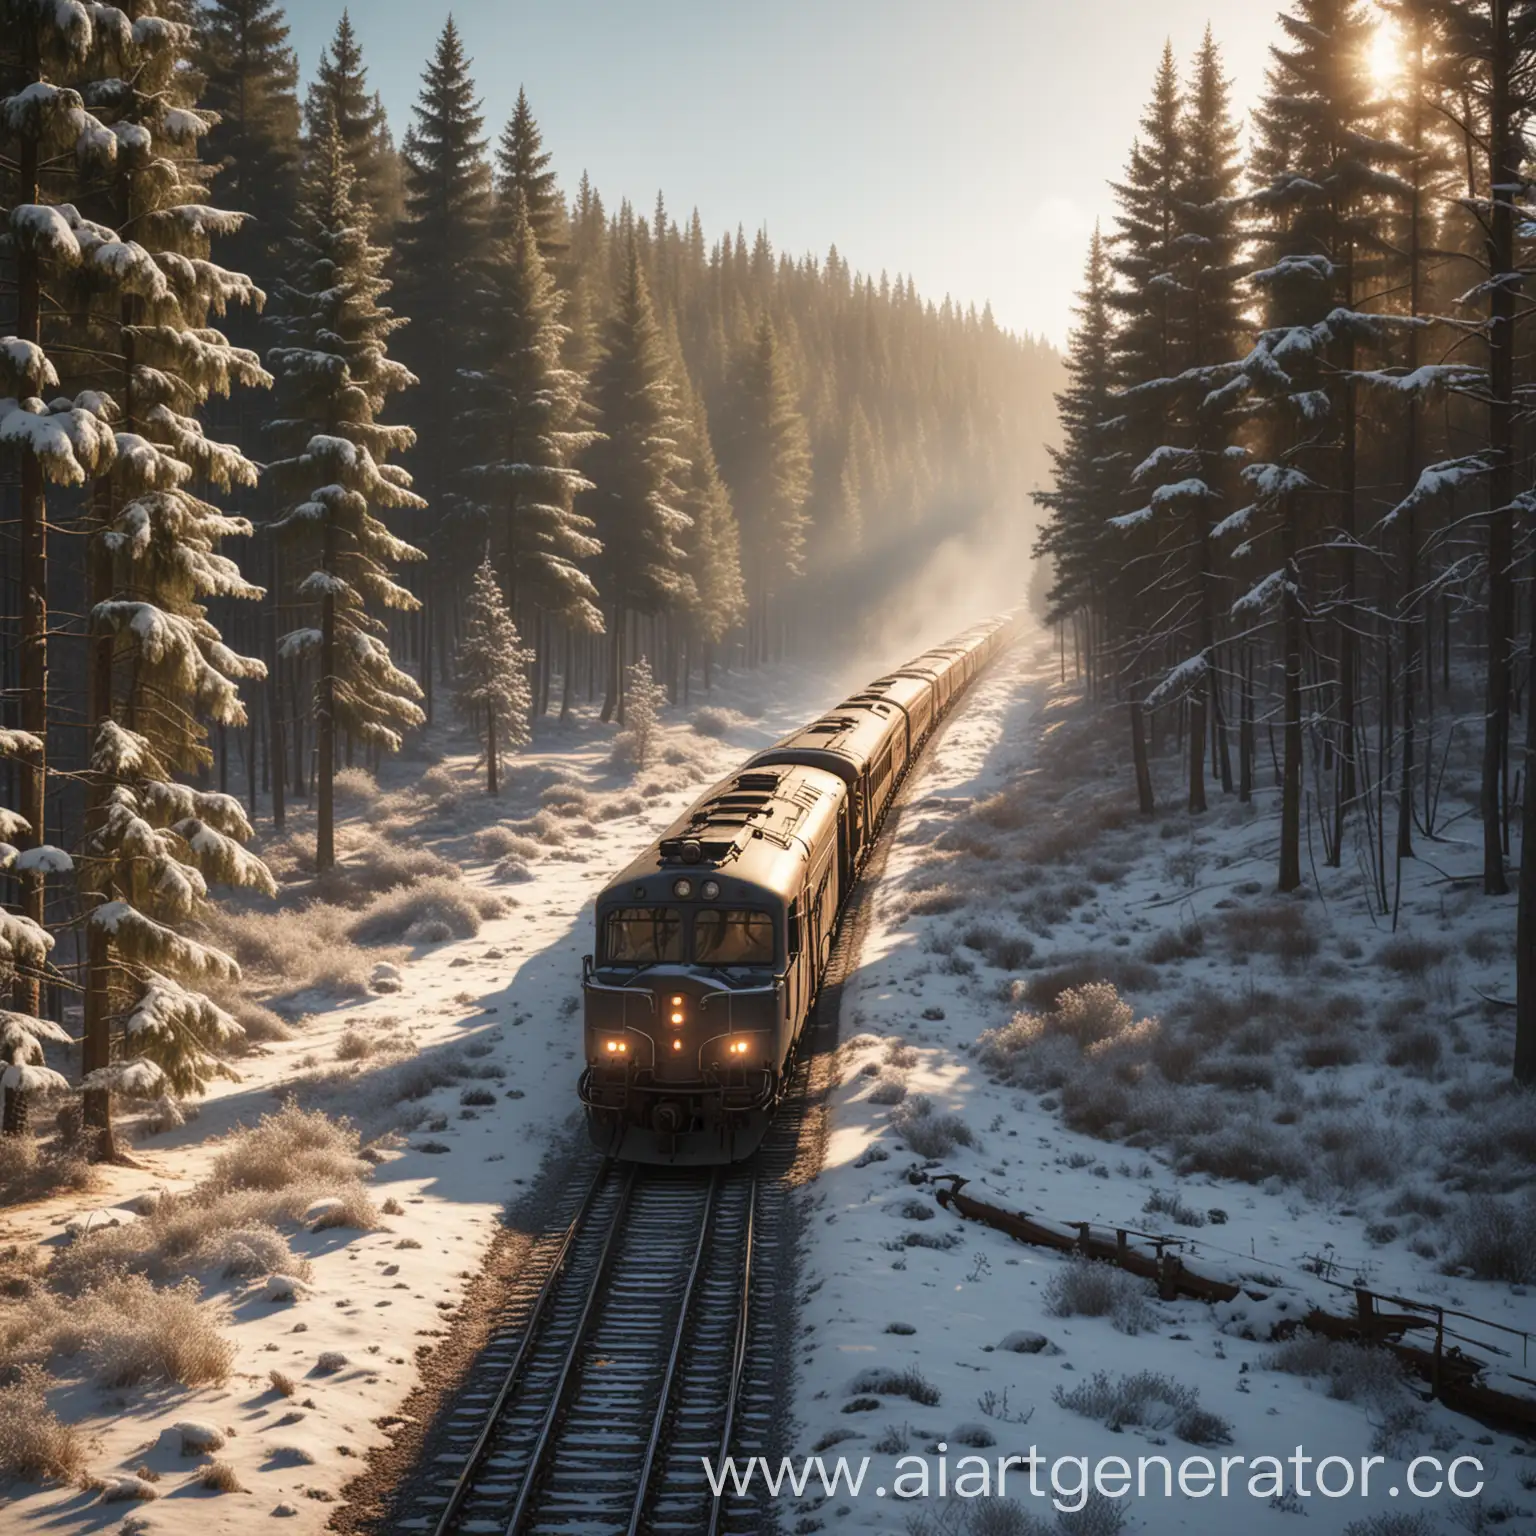 Train-Riding-into-Winter-Forest-in-Realism-Style